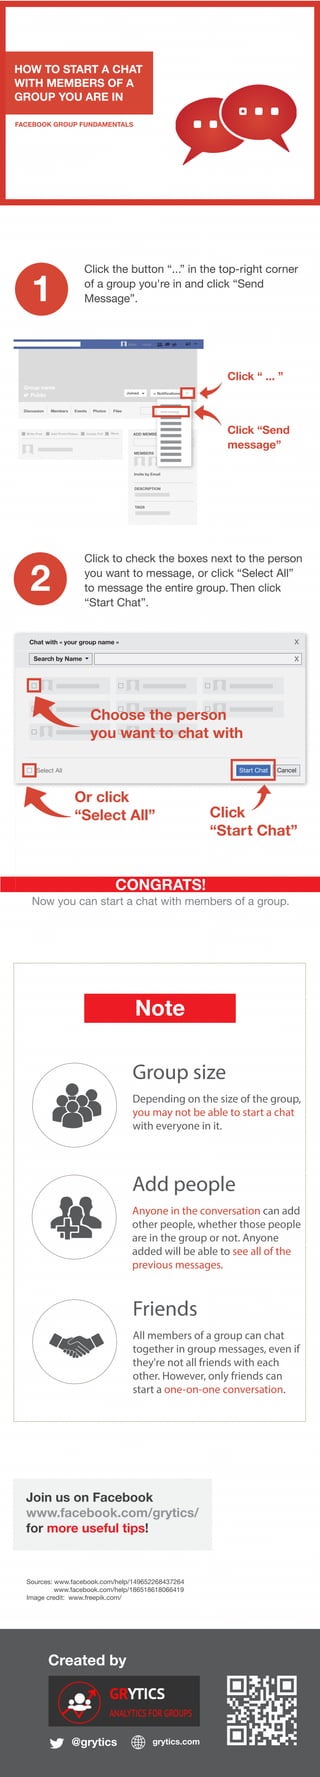 Created by
@grytics grytics.com
Join us on Facebook
www.facebook.com/grytics/
for more useful tips!
HOW TO START A CHAT
WITH MEMBERS OF A
GROUP YOU ARE IN
FACEBOOK GROUP FUNDAMENTALS
Click “ ... ”
1
2
CONGRATS!
Now you can start a chat with members of a group.
Sources: www.facebook.com/help/149652268437264
www.facebook.com/help/186518618066419
Image credit: www.freepik.com/
Click the button “...” in the top-right corner
of a group you're in and click “Send
Message”.
Note
Group size
Depending on the size of the group,
you may not be able to start a chat
with everyone in it.
Group nameName Home
Group name
Public Joined Notifications ...
Discussion Members Events Photos Files
Write Post Add Photo/Videso Create Poll More ADD MEMBERS
MEMBERS
Invite by Email
DESCRIPTION
TAGS
Click to check the boxes next to the person
you want to message, or click “Select All”
to message the entire group. Then click
“Start Chat”.
Send message
Click “Send
message”
Chat with « your group name »
Start Chat Cancel
x
Search by Name x
Select All
Choose the person
you want to chat with
Or click
“Select All” Click
“Start Chat”
Add people
Anyone in the conversation can add
other people, whether those people
are in the group or not. Anyone
added will be able to see all of the
previous messages.
Friends
All members of a group can chat
together in group messages, even if
they're not all friends with each
other. However, only friends can
start a one-on-one conversation.
 